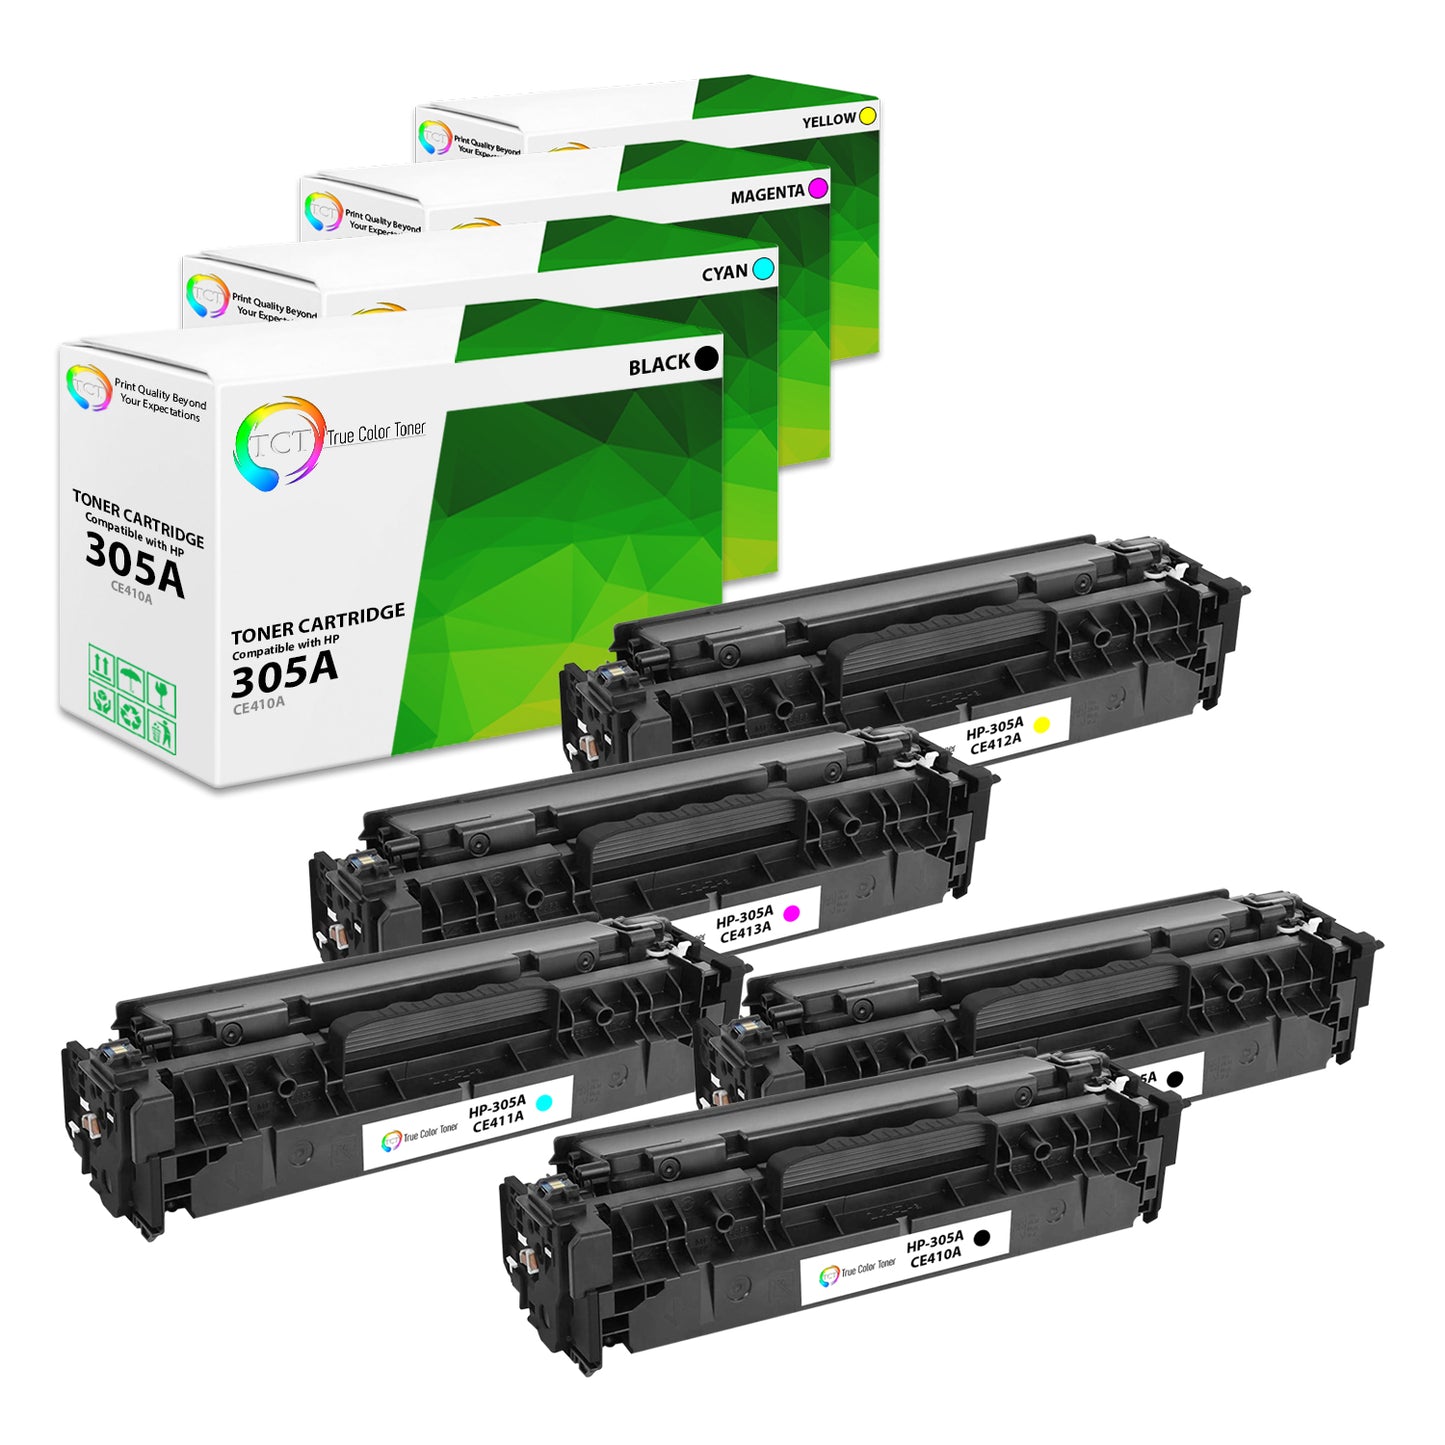 TCT Compatible Toner Cartridge Replacement for the HP 305A Series - 5 Pack (BK, C, M, Y)